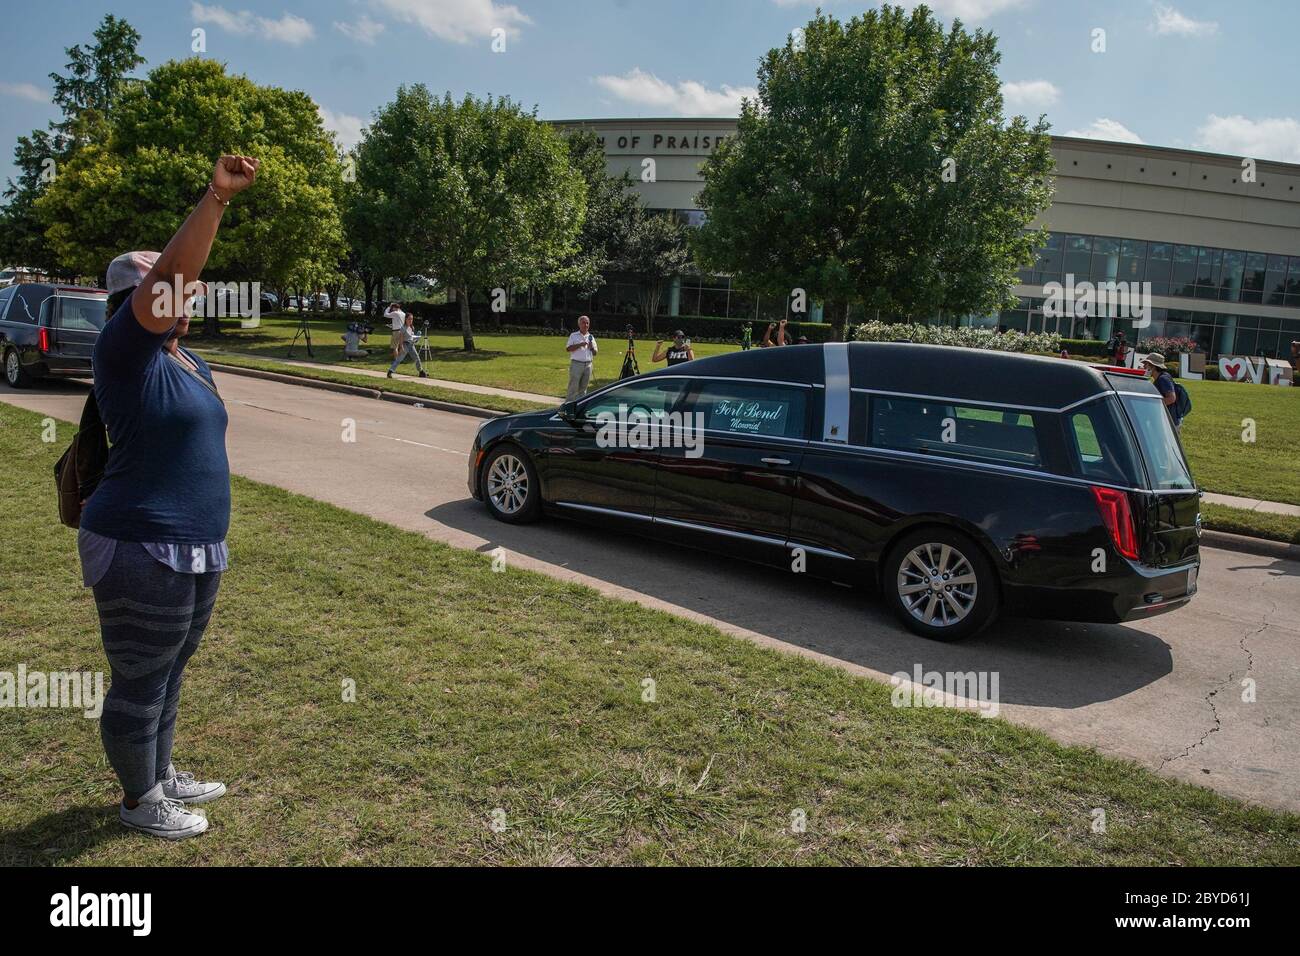 Houston, United States. 09th June, 2020. A woman raises her fist in salute as the Hearse carrying the body of George Floyd to Houston Memorial Gardens passes the Fountain of Praise church in Houston, Texas on Tuesday, June 9, 2020. George Floyd died in police custody in Minneapolis, Minnesota on May 25, 2020. His death sparked demonstrations globally to combat racism and legislation in Congress for reforms. Photo by Jemal Countess/UPI Credit: UPI/Alamy Live News Stock Photo